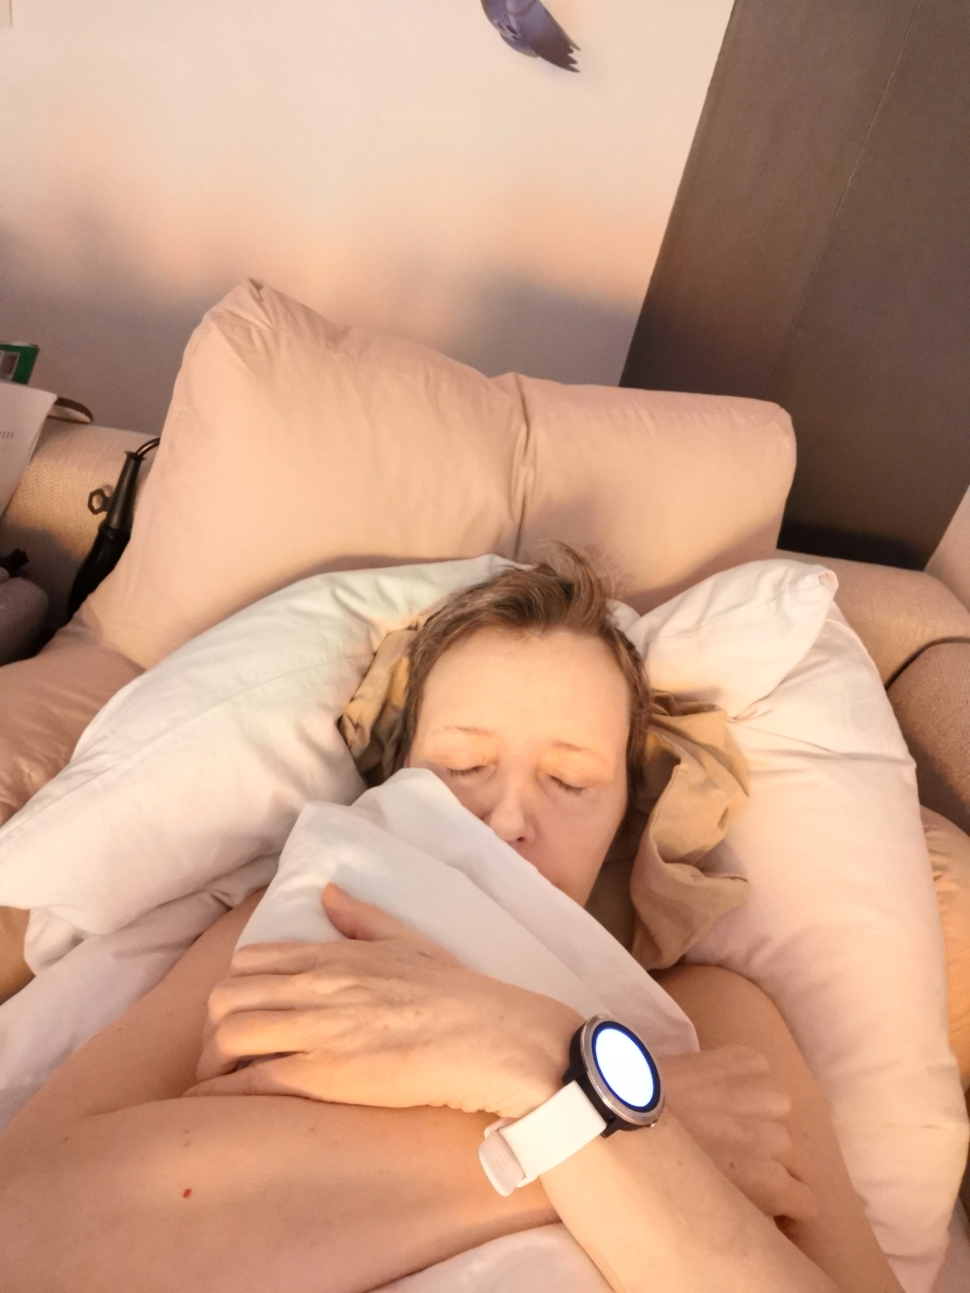 Picture of Nicole, a white woman with short light brown hair. She is lying down with eyes closed, holding a pillow. She is wearing a medical alert smart watch